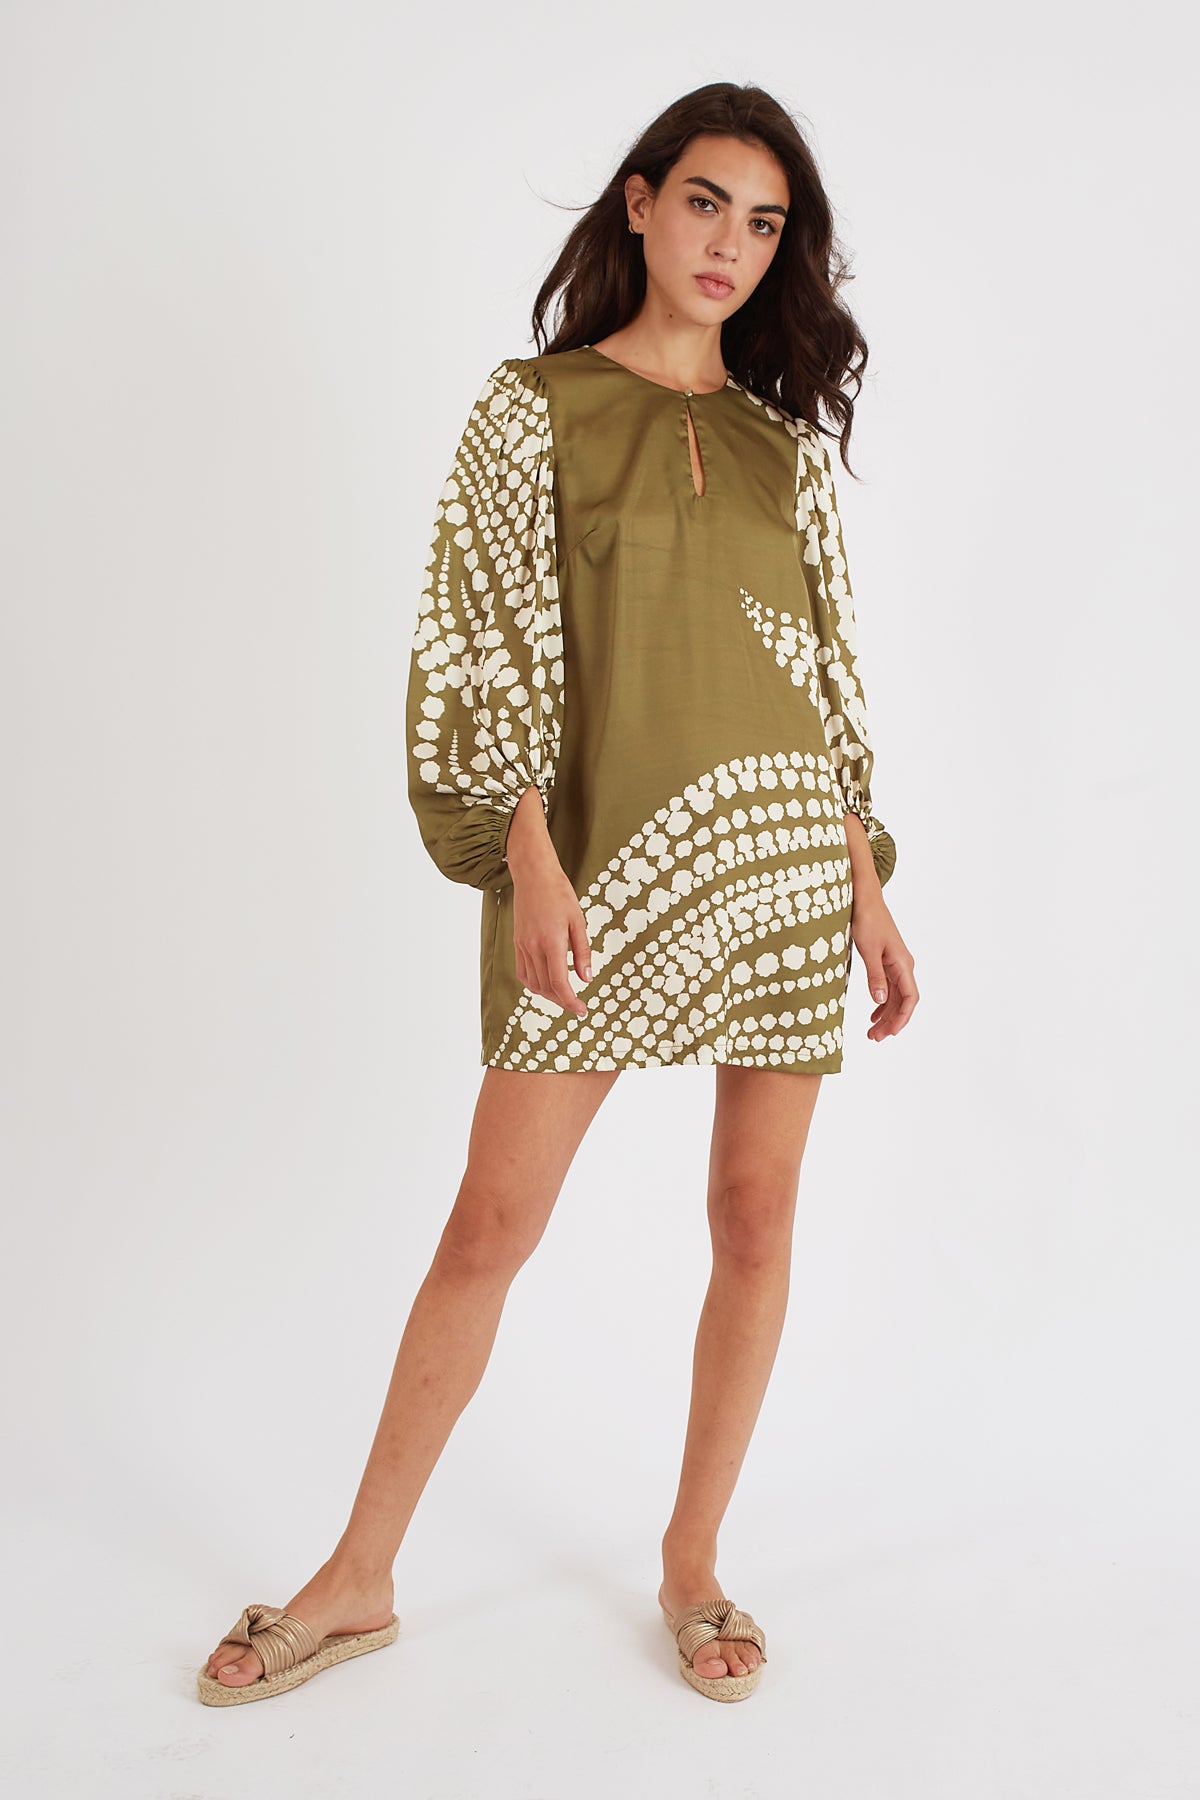 The Odes Mia Dress in Olive